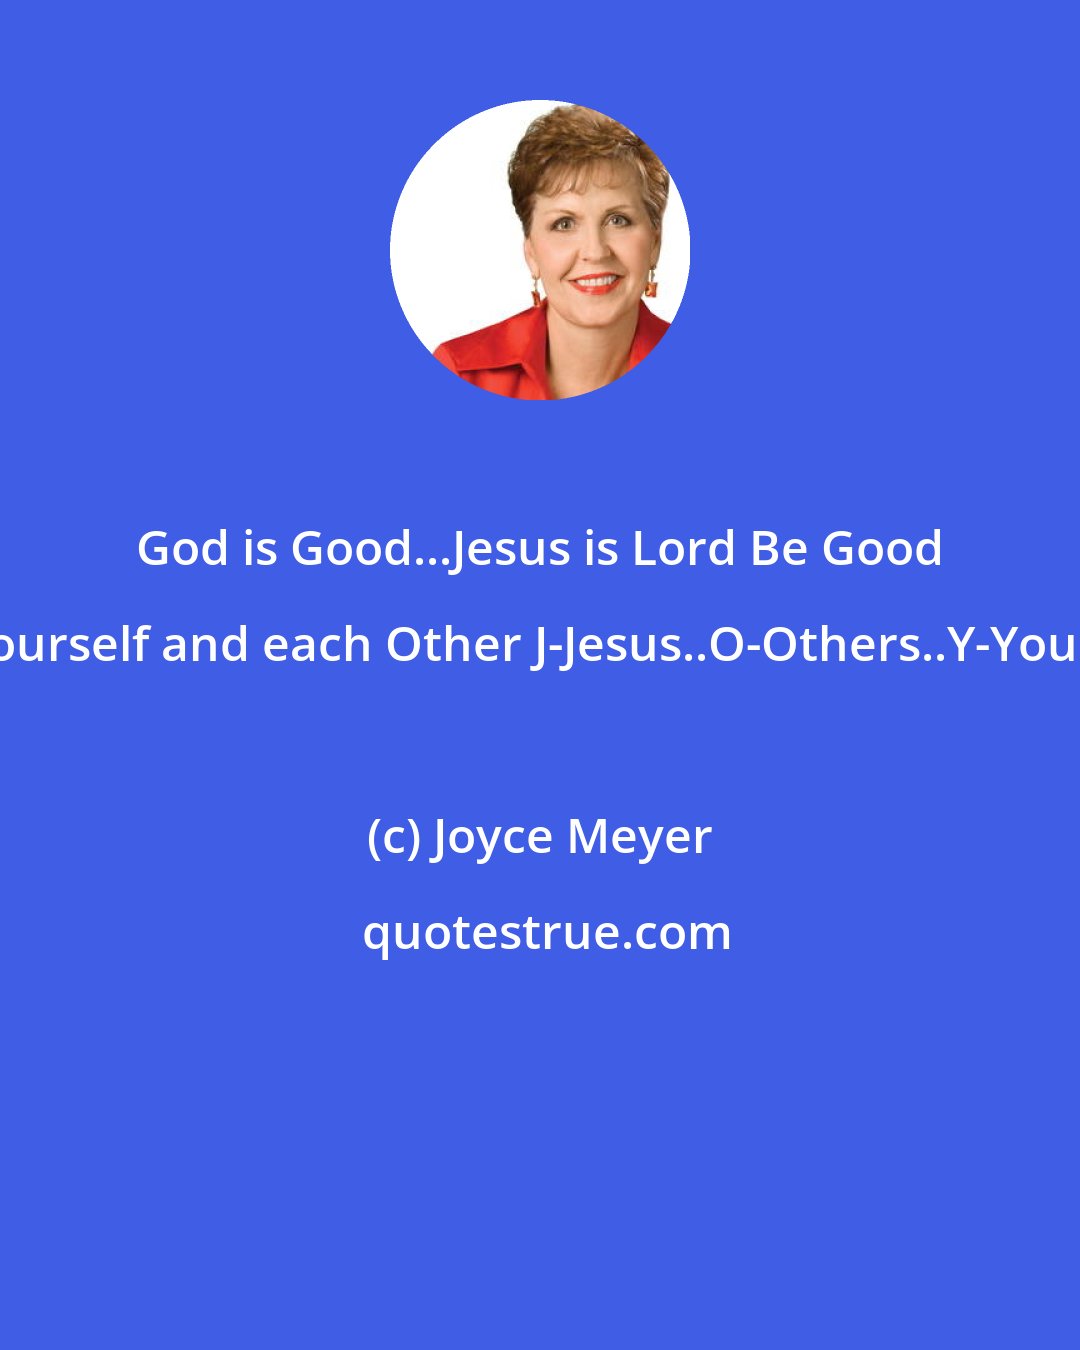 Joyce Meyer: God is Good...Jesus is Lord Be Good to Yourself and each Other J-Jesus..O-Others..Y-Yourself